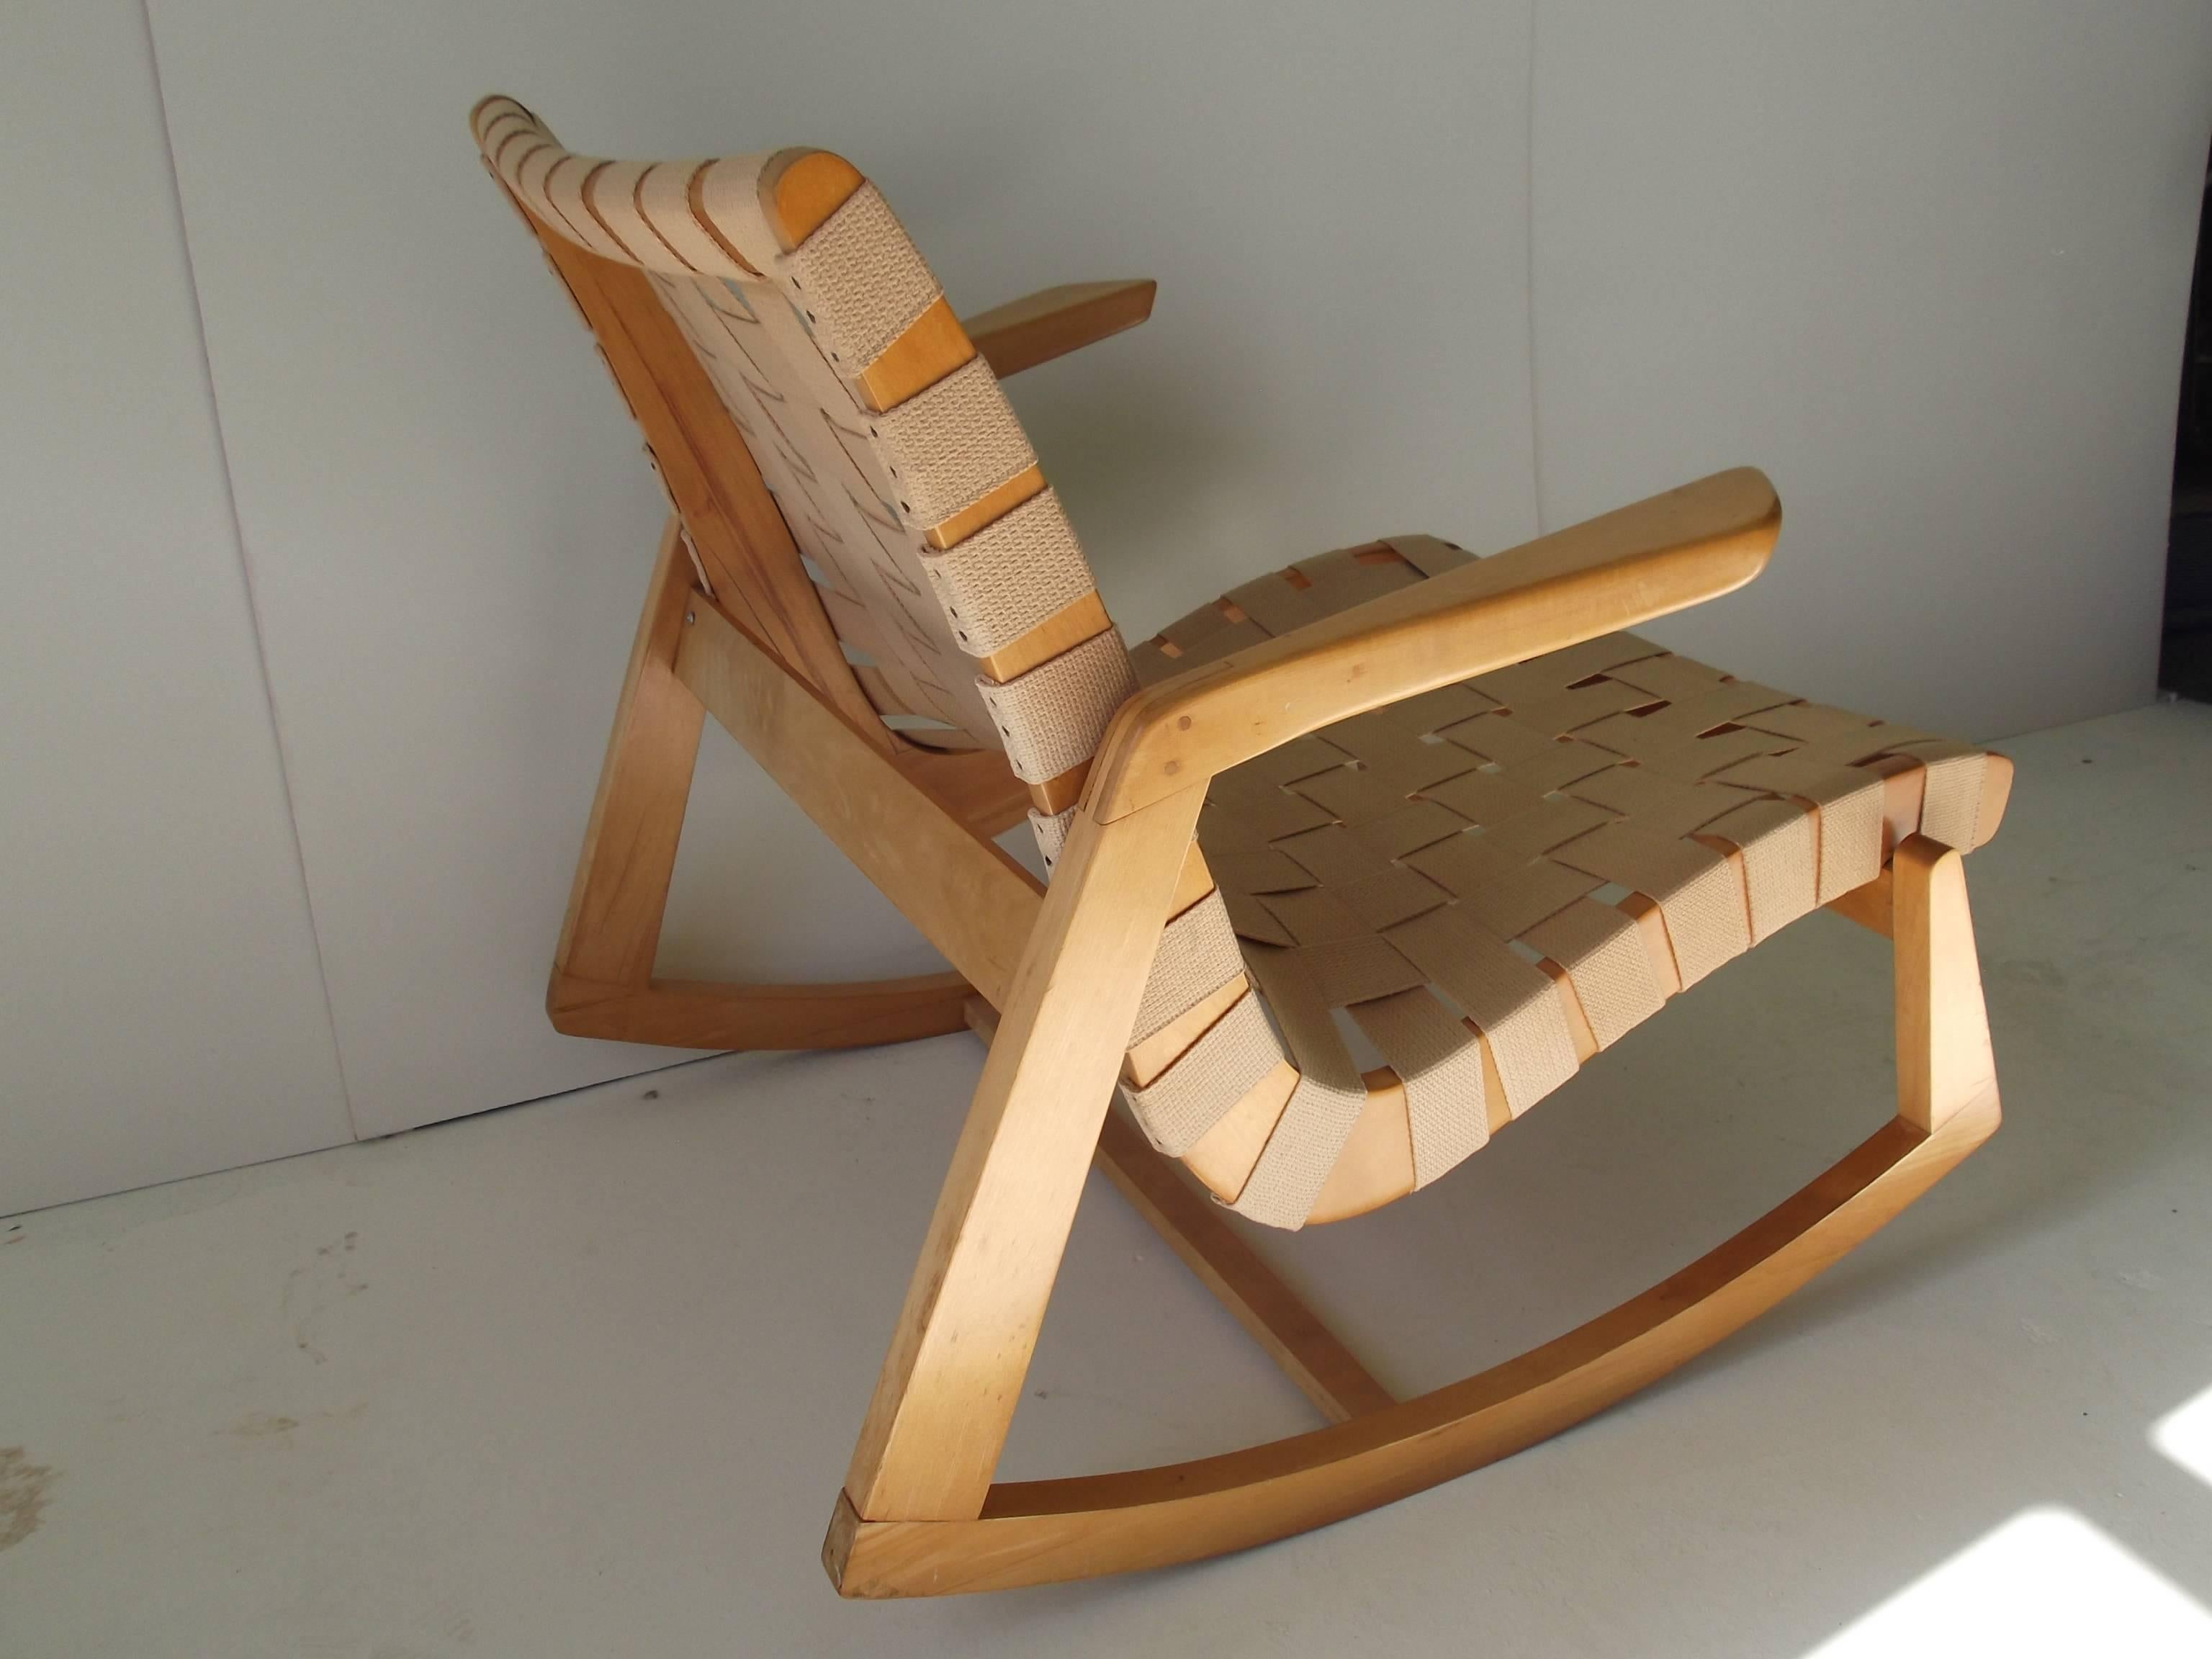 This is an early beautiful condition birch frame rocking chair designed by Ralph Rapson for Knoll, in 1945. An early version of this piece is fairly scarce, as not many have survived, due to their delicatness. It has a cotton webbed seat and back.